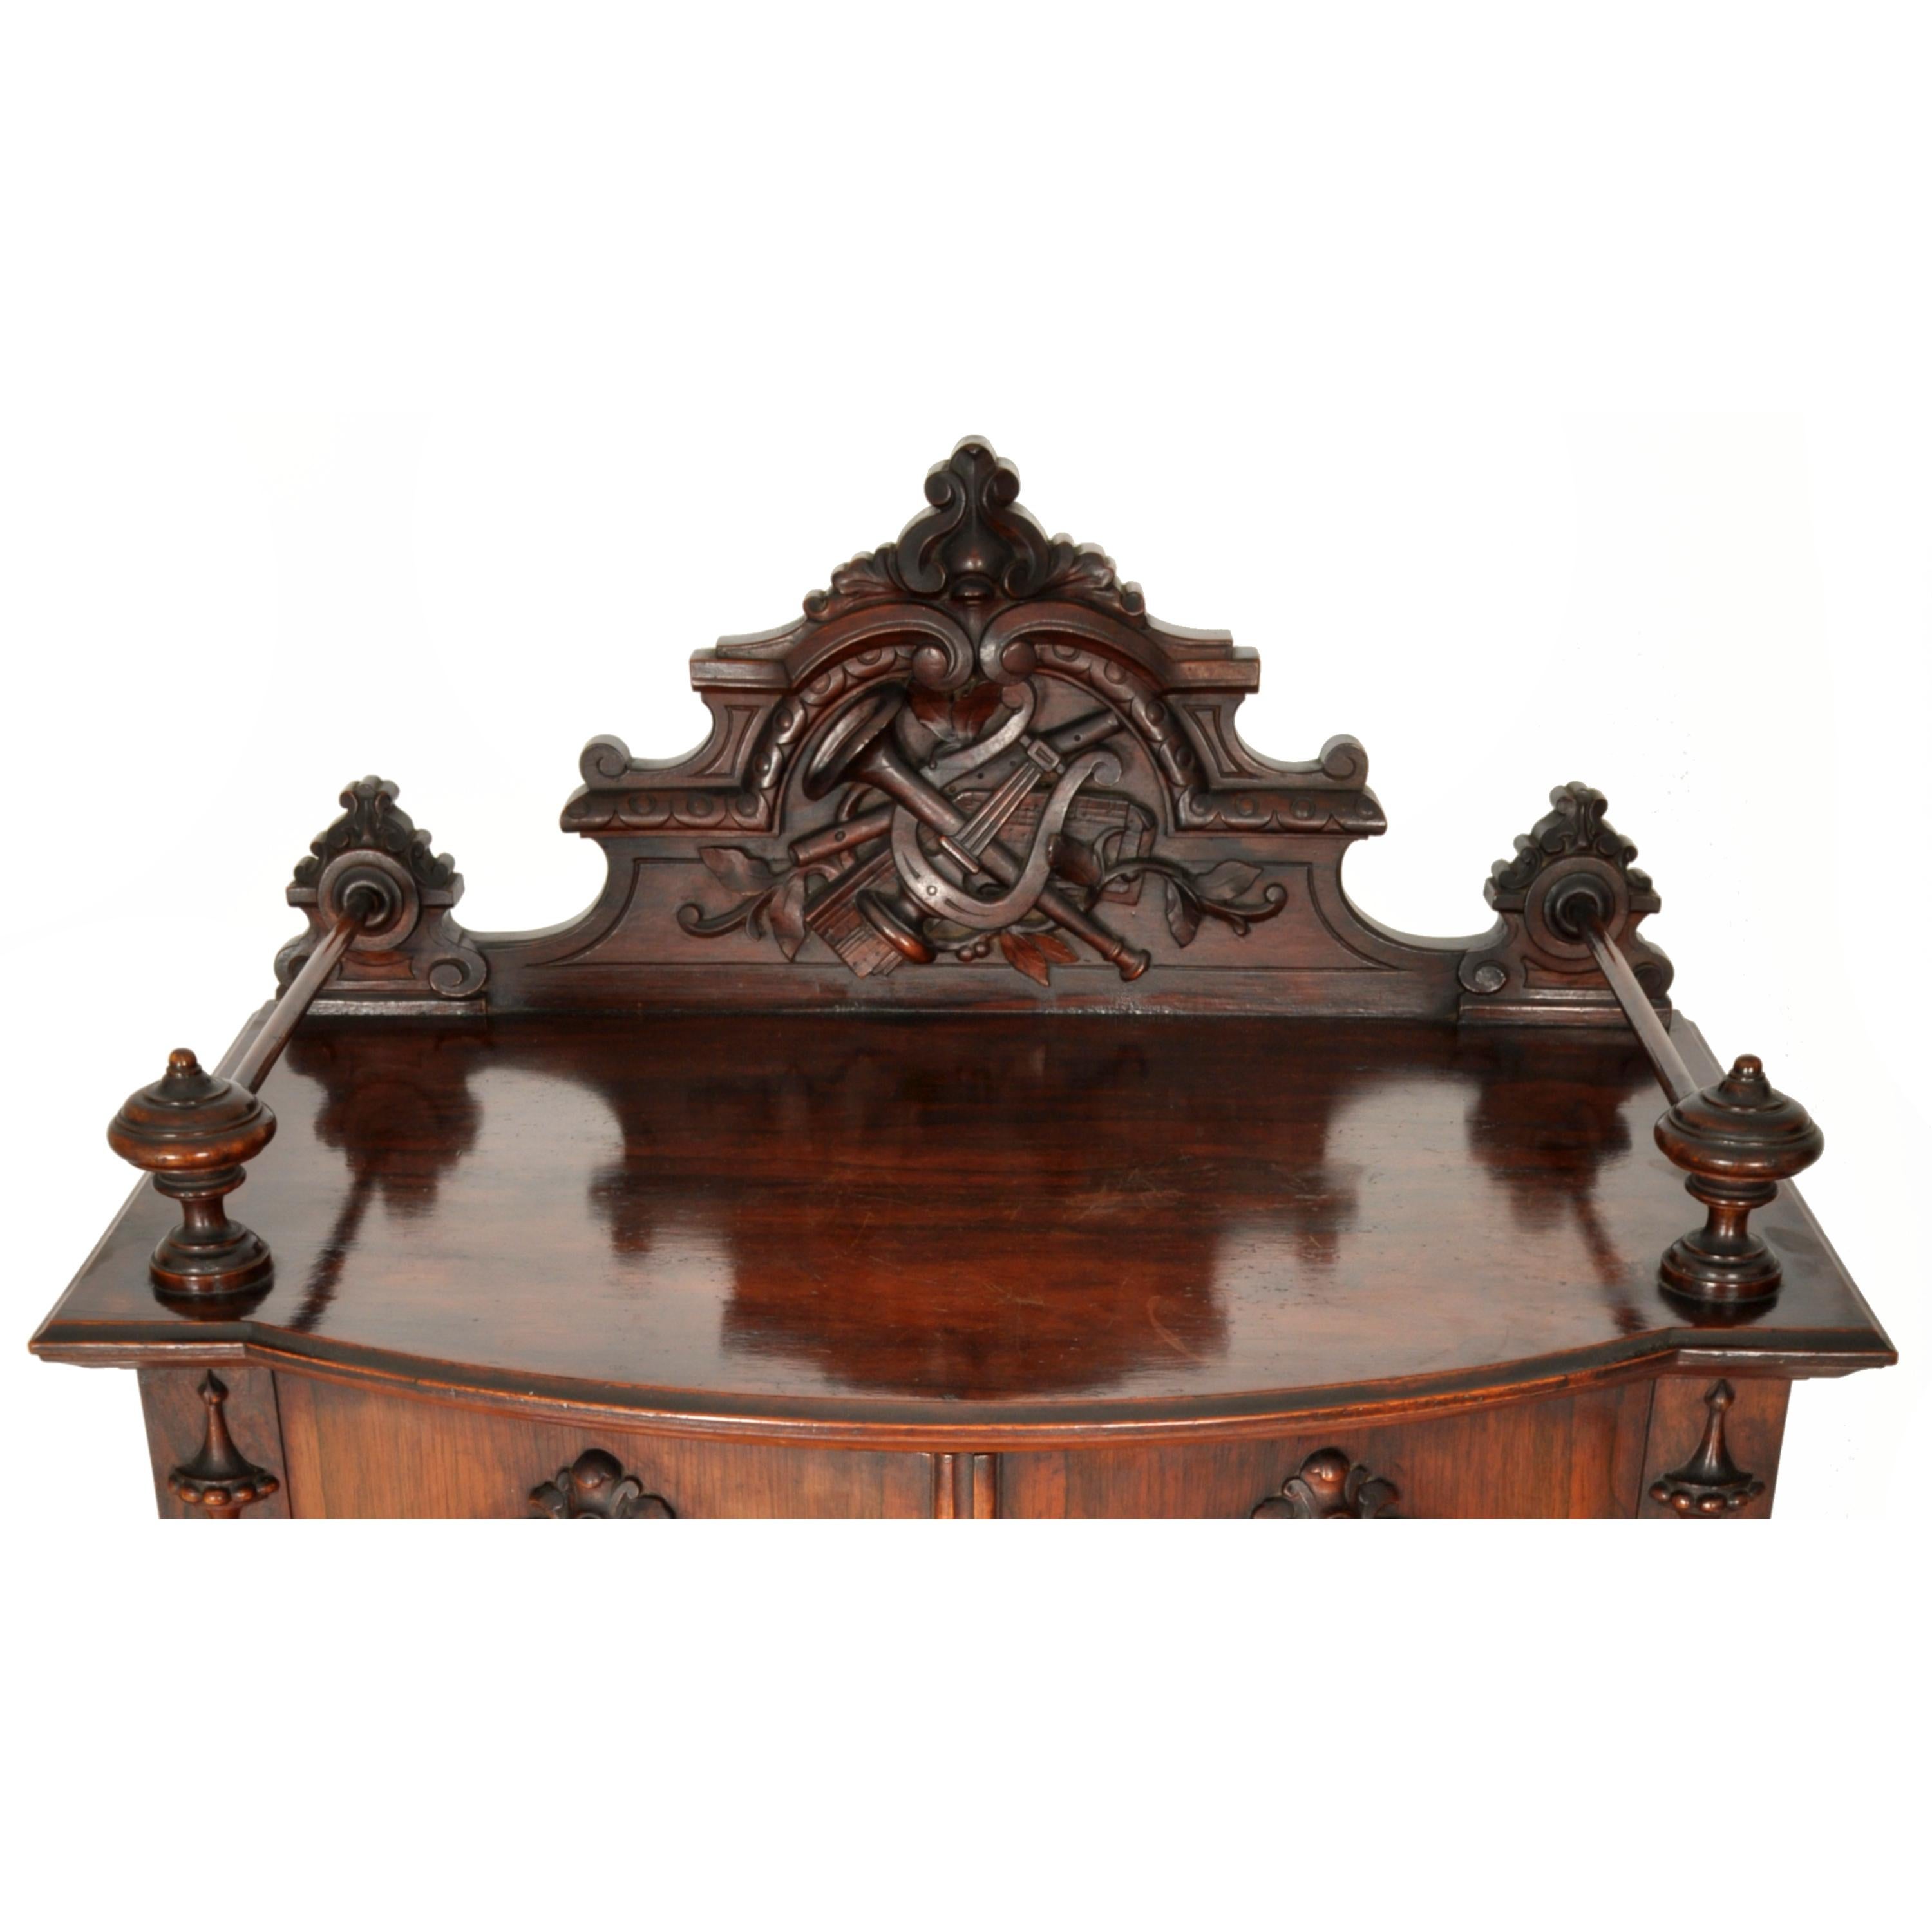 Antique American Renaissance Revival Rosewood Carved Music Cabinet, Circa 1870 5